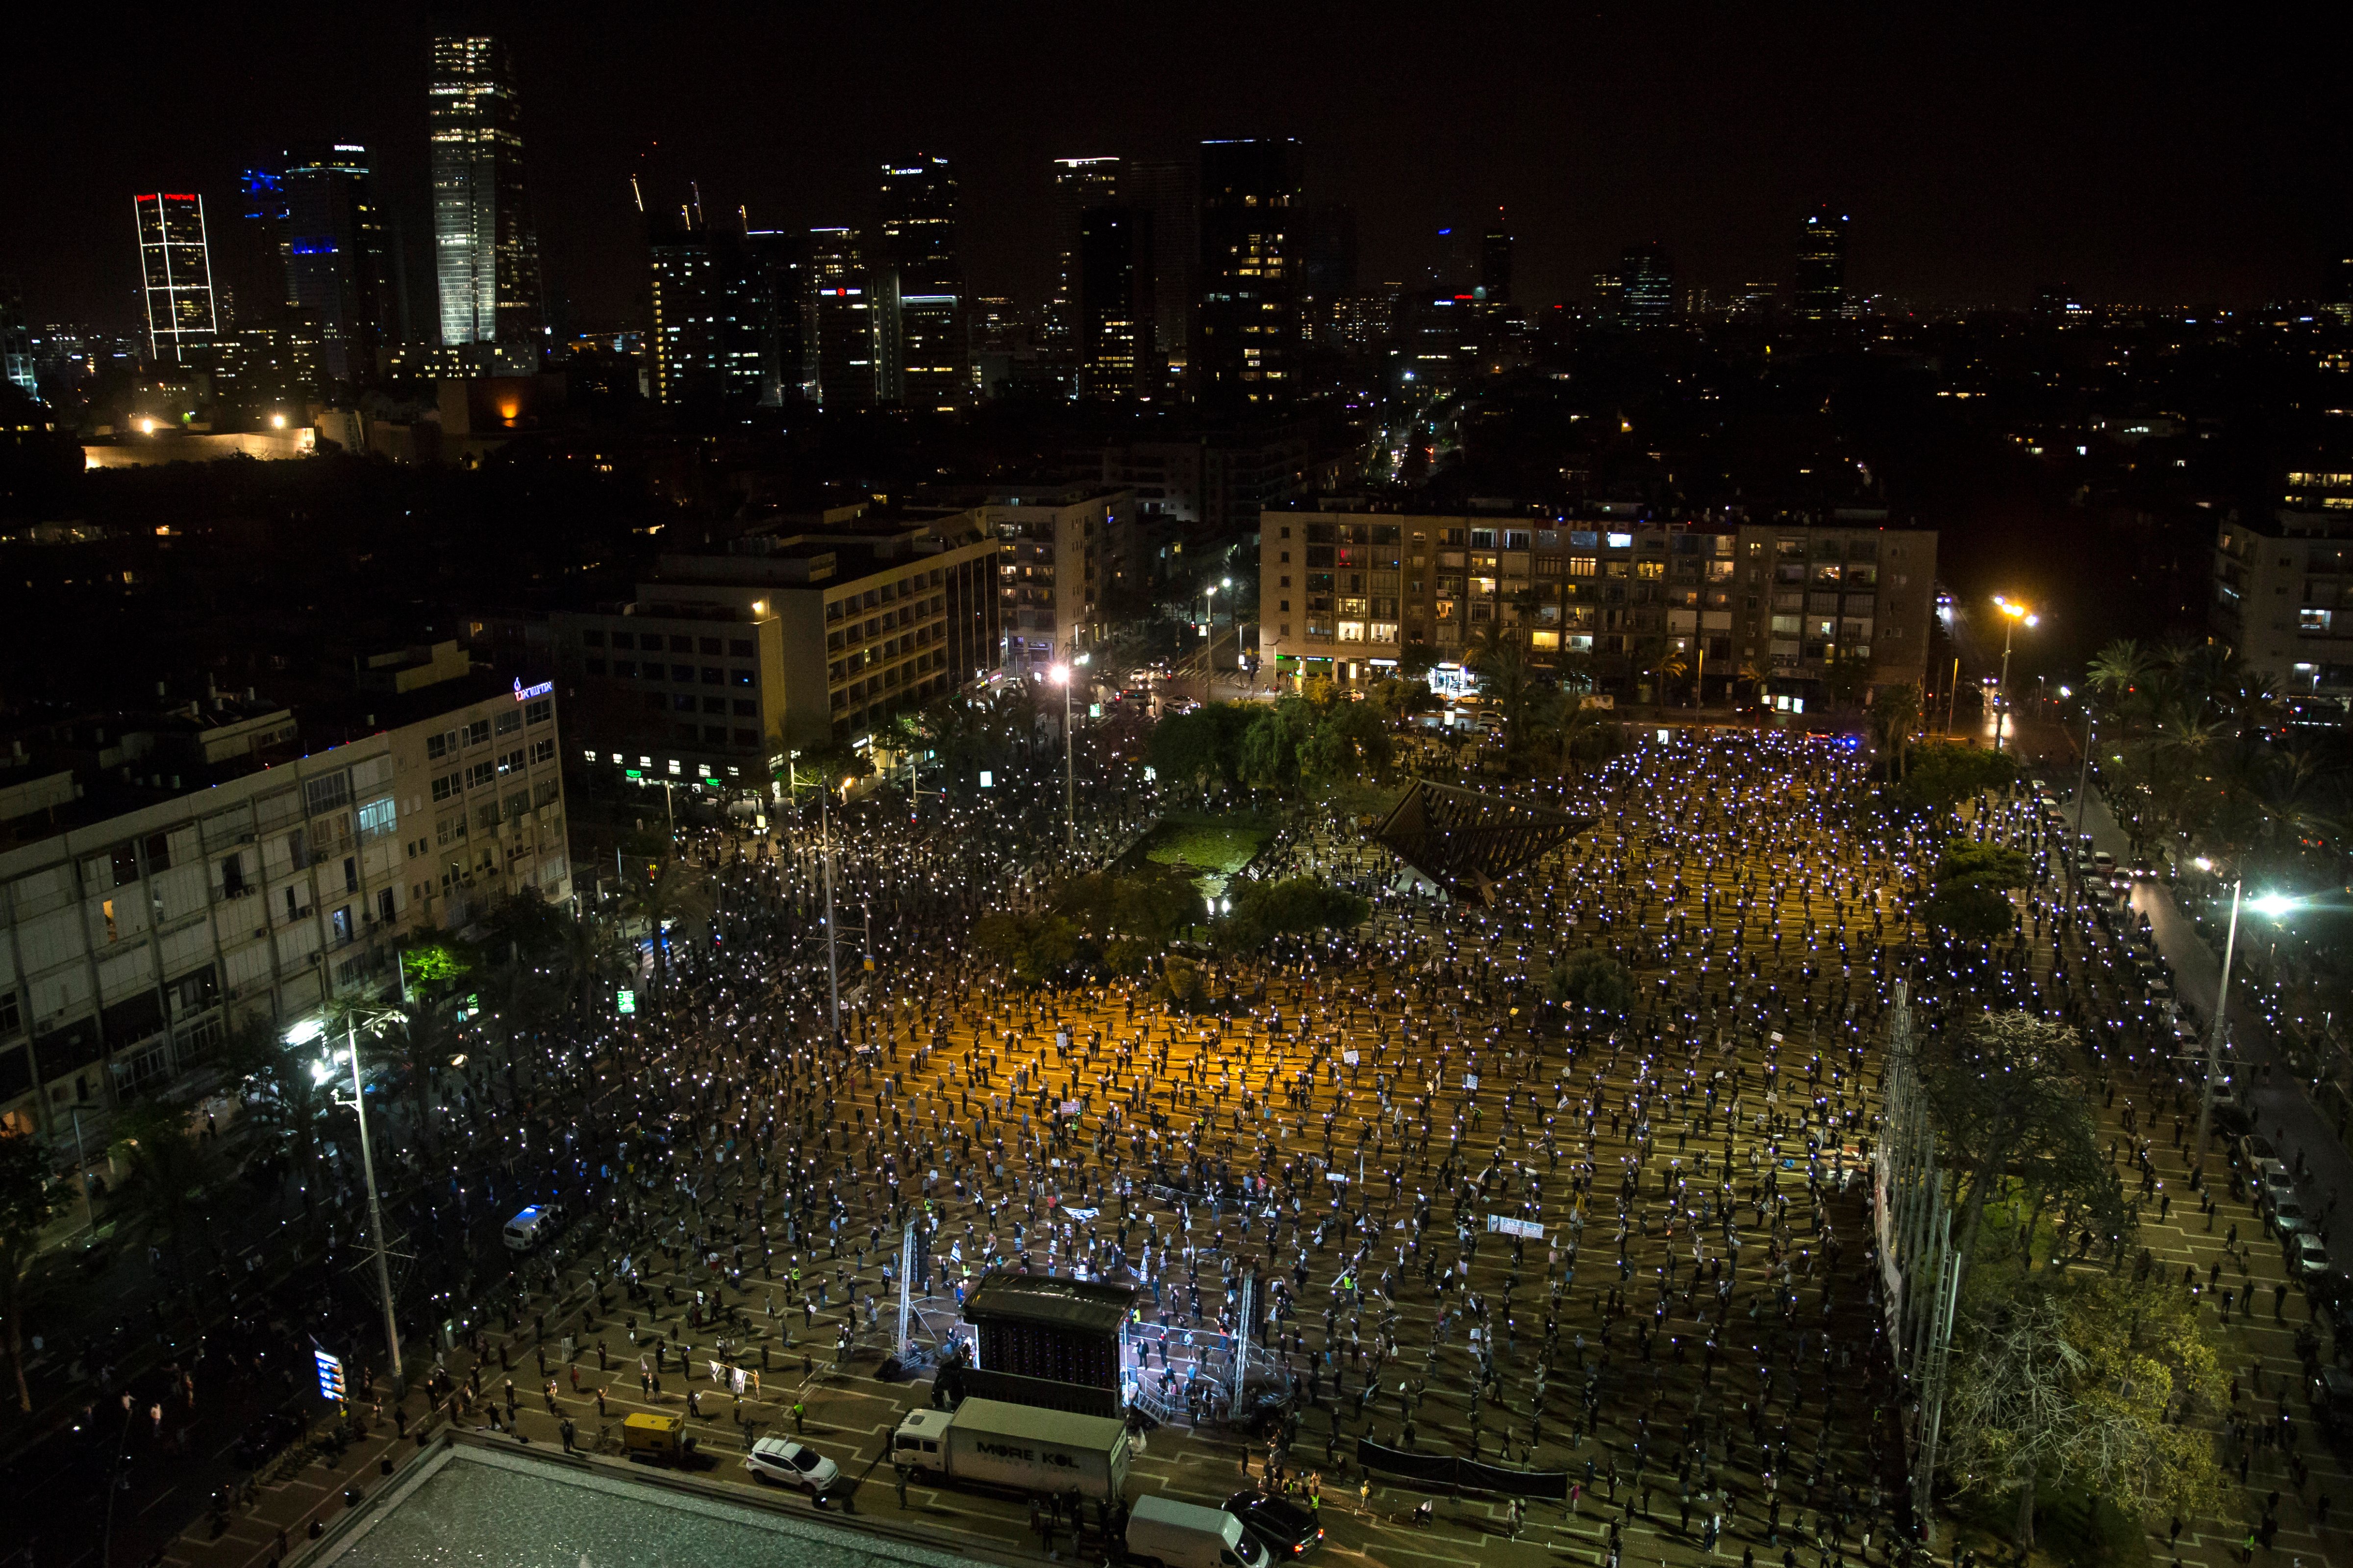 Israelis light flash lights as they protest at a rally in Rabin Square on April 19, 2020 in Tel Aviv, Israel. Thousands of Israelis gather at an Anti-Corruption rally under coronavirus restrictions, decrying proposed unity government talks between Israeli Prime Minister Benjamin Netanyahu, and Blue and White Party leader Benny Gantz. (Photo by /Getty Images) (Amir Levy—Getty Images)